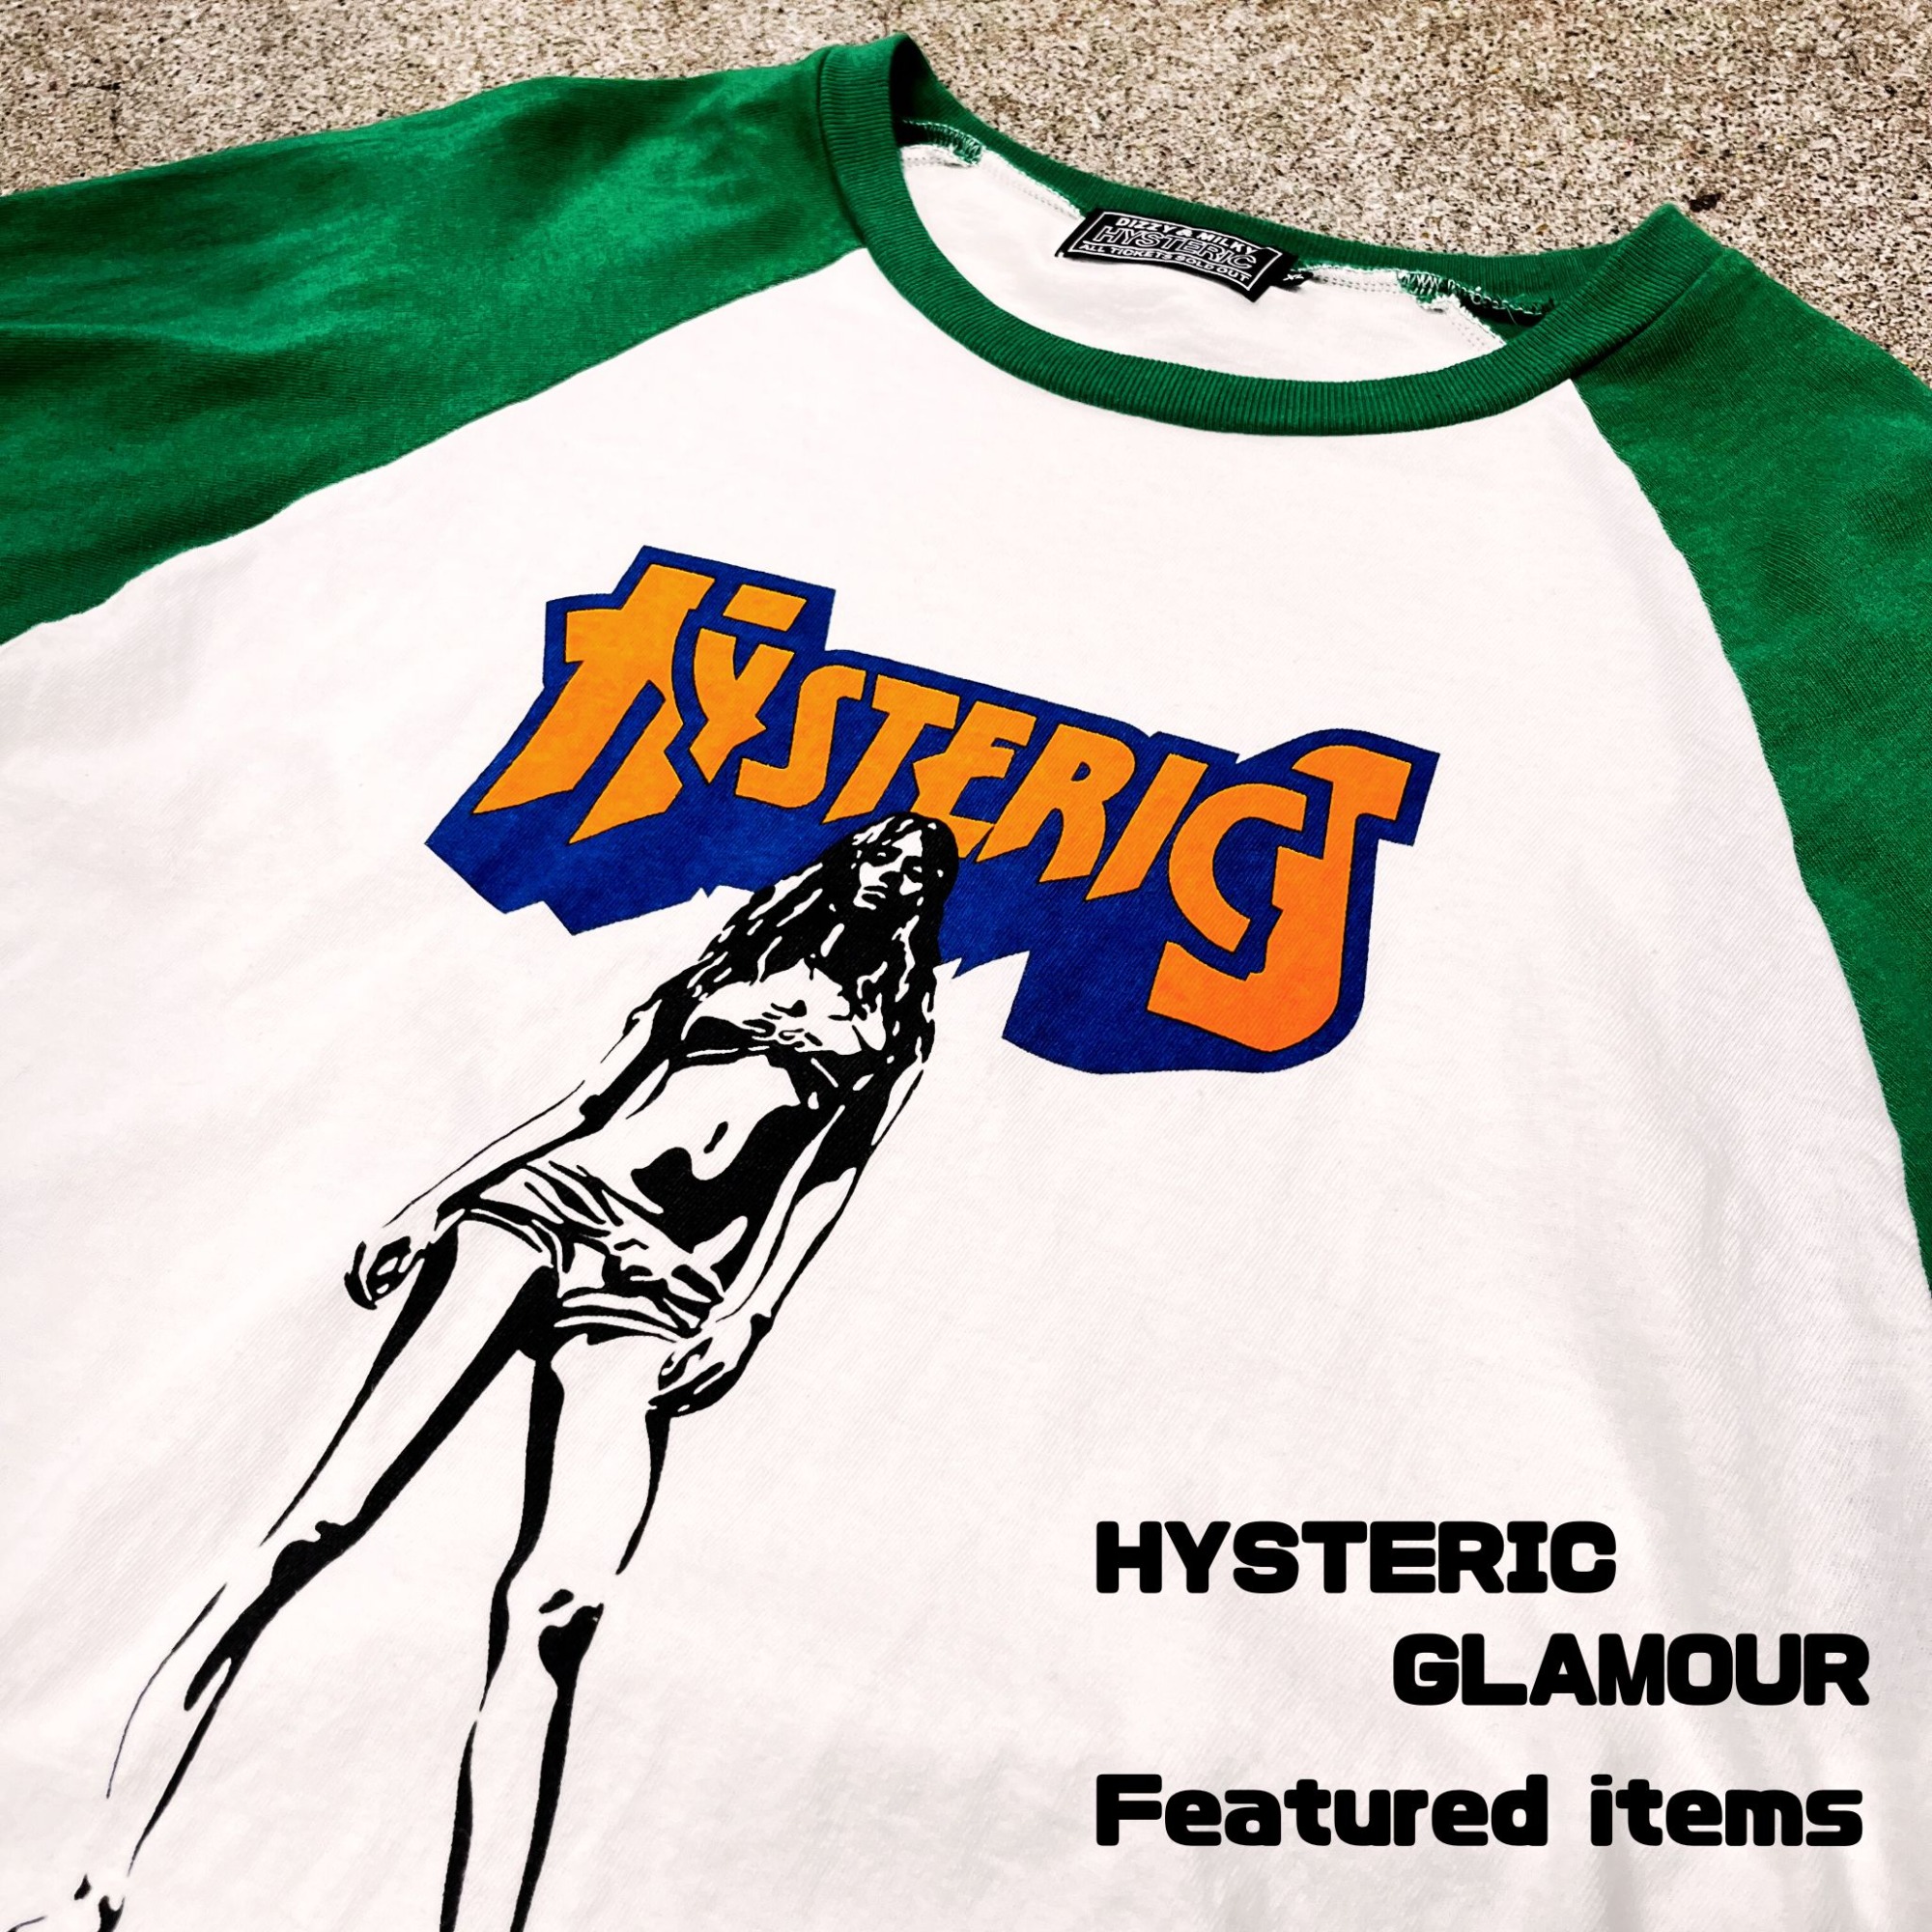 00’s hysteric glamour archive Tシャツ　パンク 1